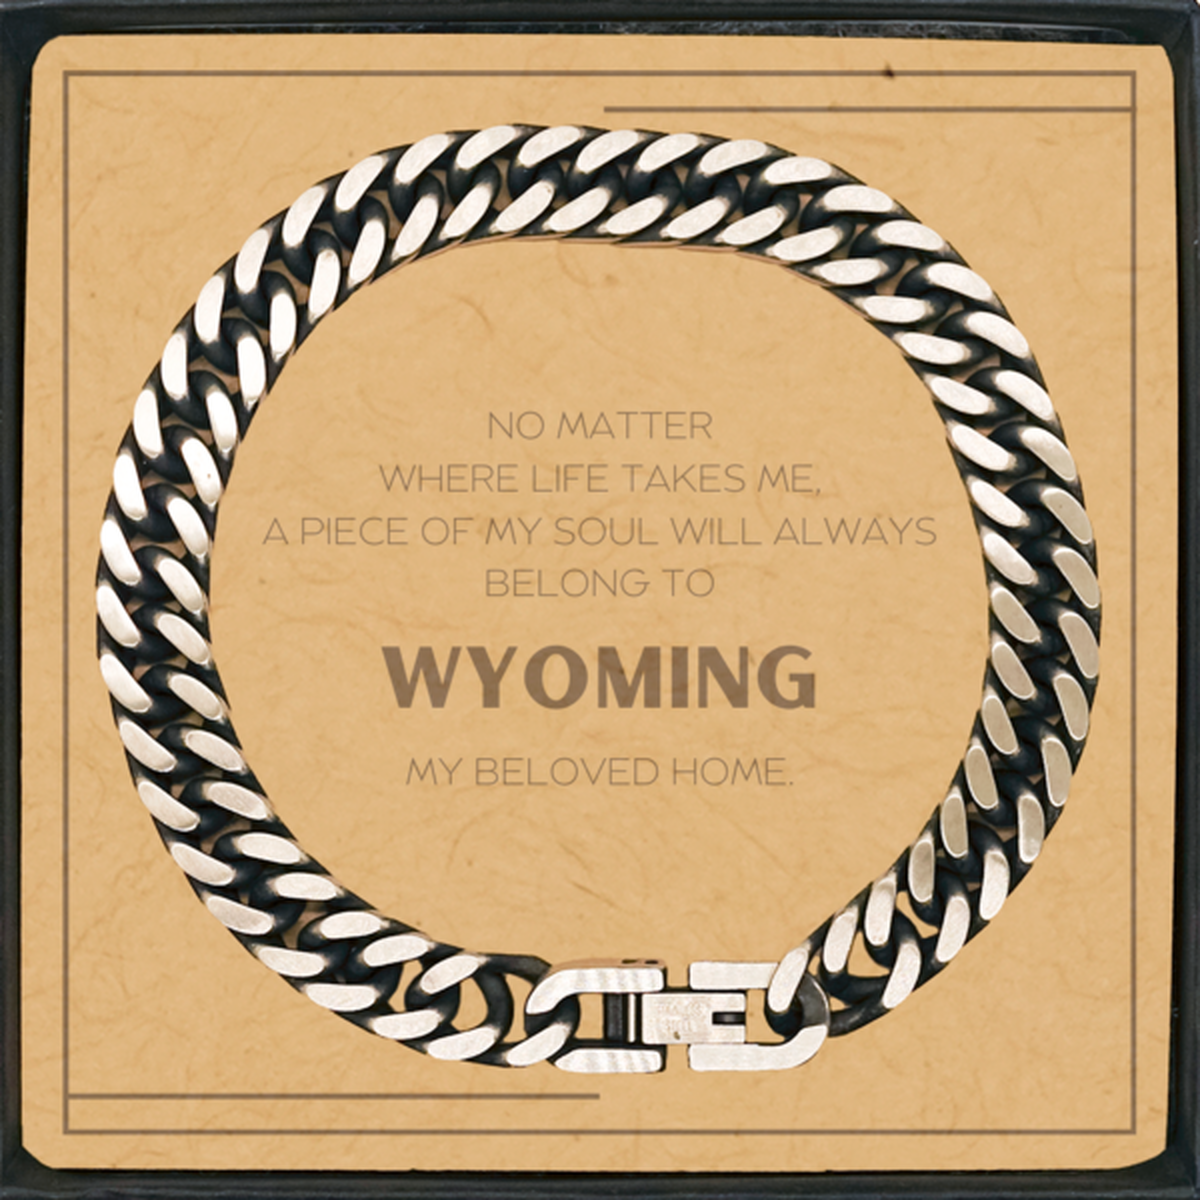 Love Wyoming State Gifts, My soul will always belong to Wyoming, Proud Cuban Link Chain Bracelet, Birthday Unique Gifts For Wyoming Men, Women, Friends